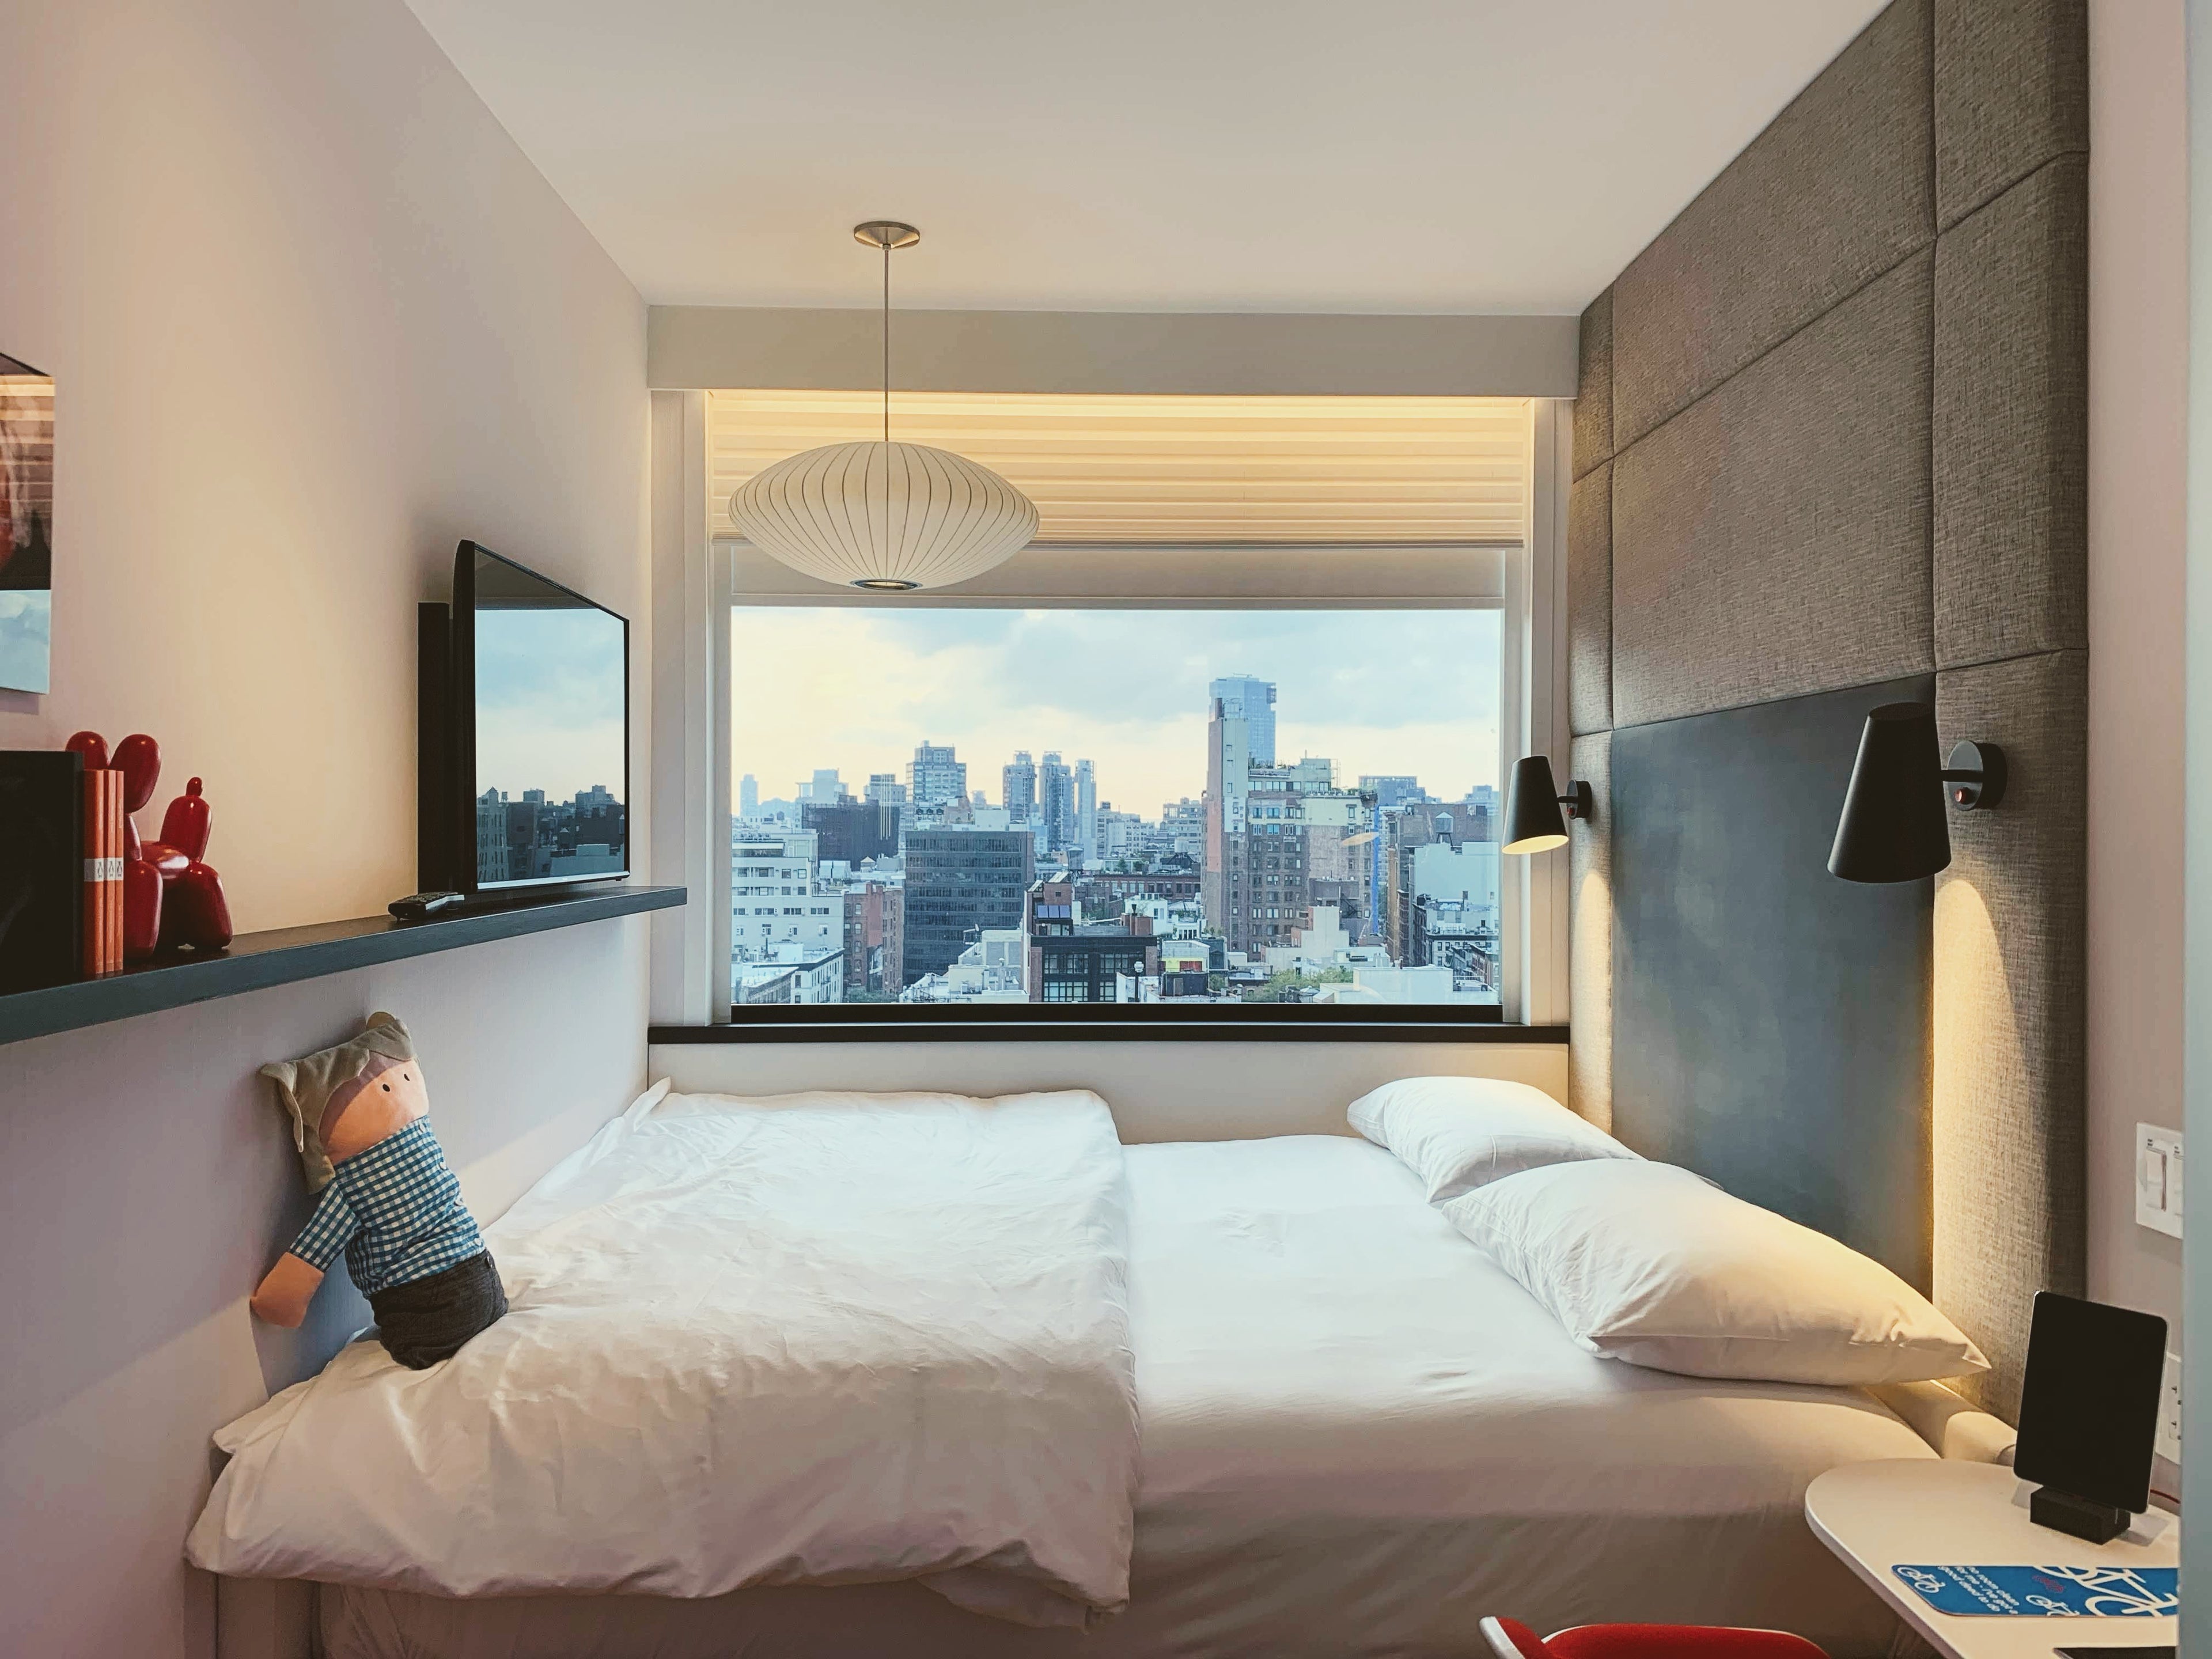 CitizenM Bowery New York Modular Hotel Room and NYC View